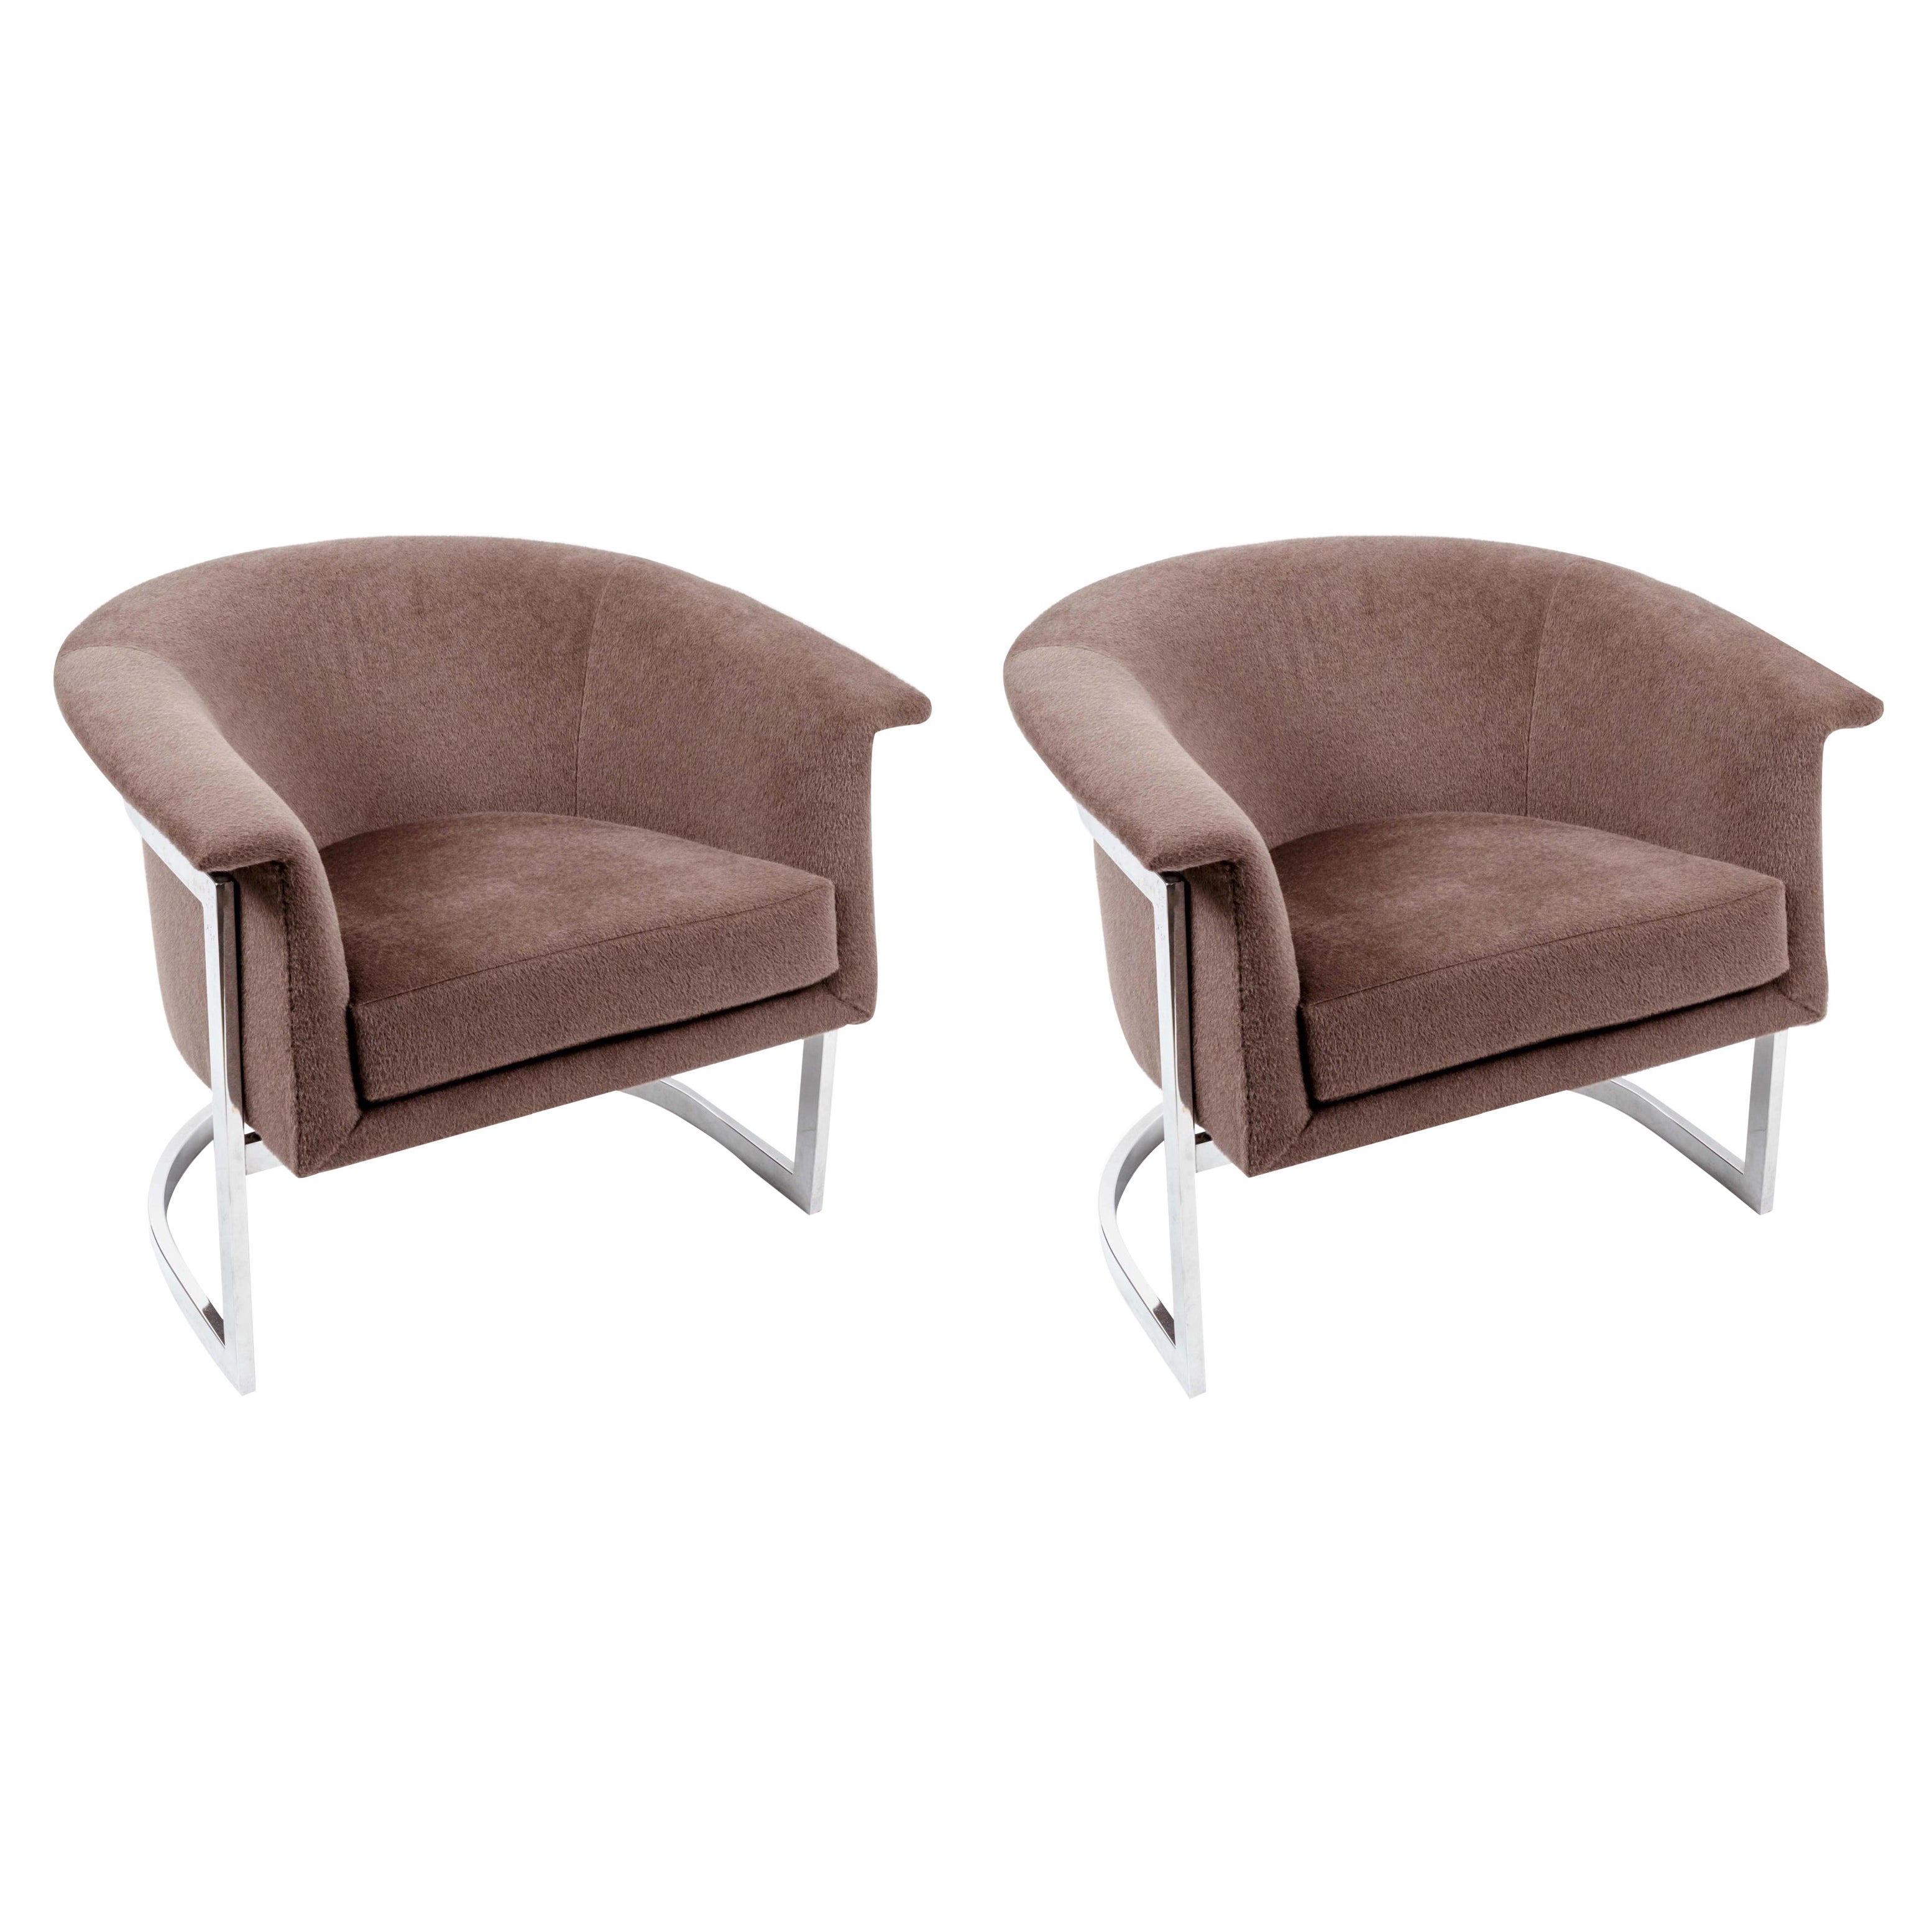 Pair of Chromed Steel Upholstered Lounge Chairs in the Style of Milo Baughman